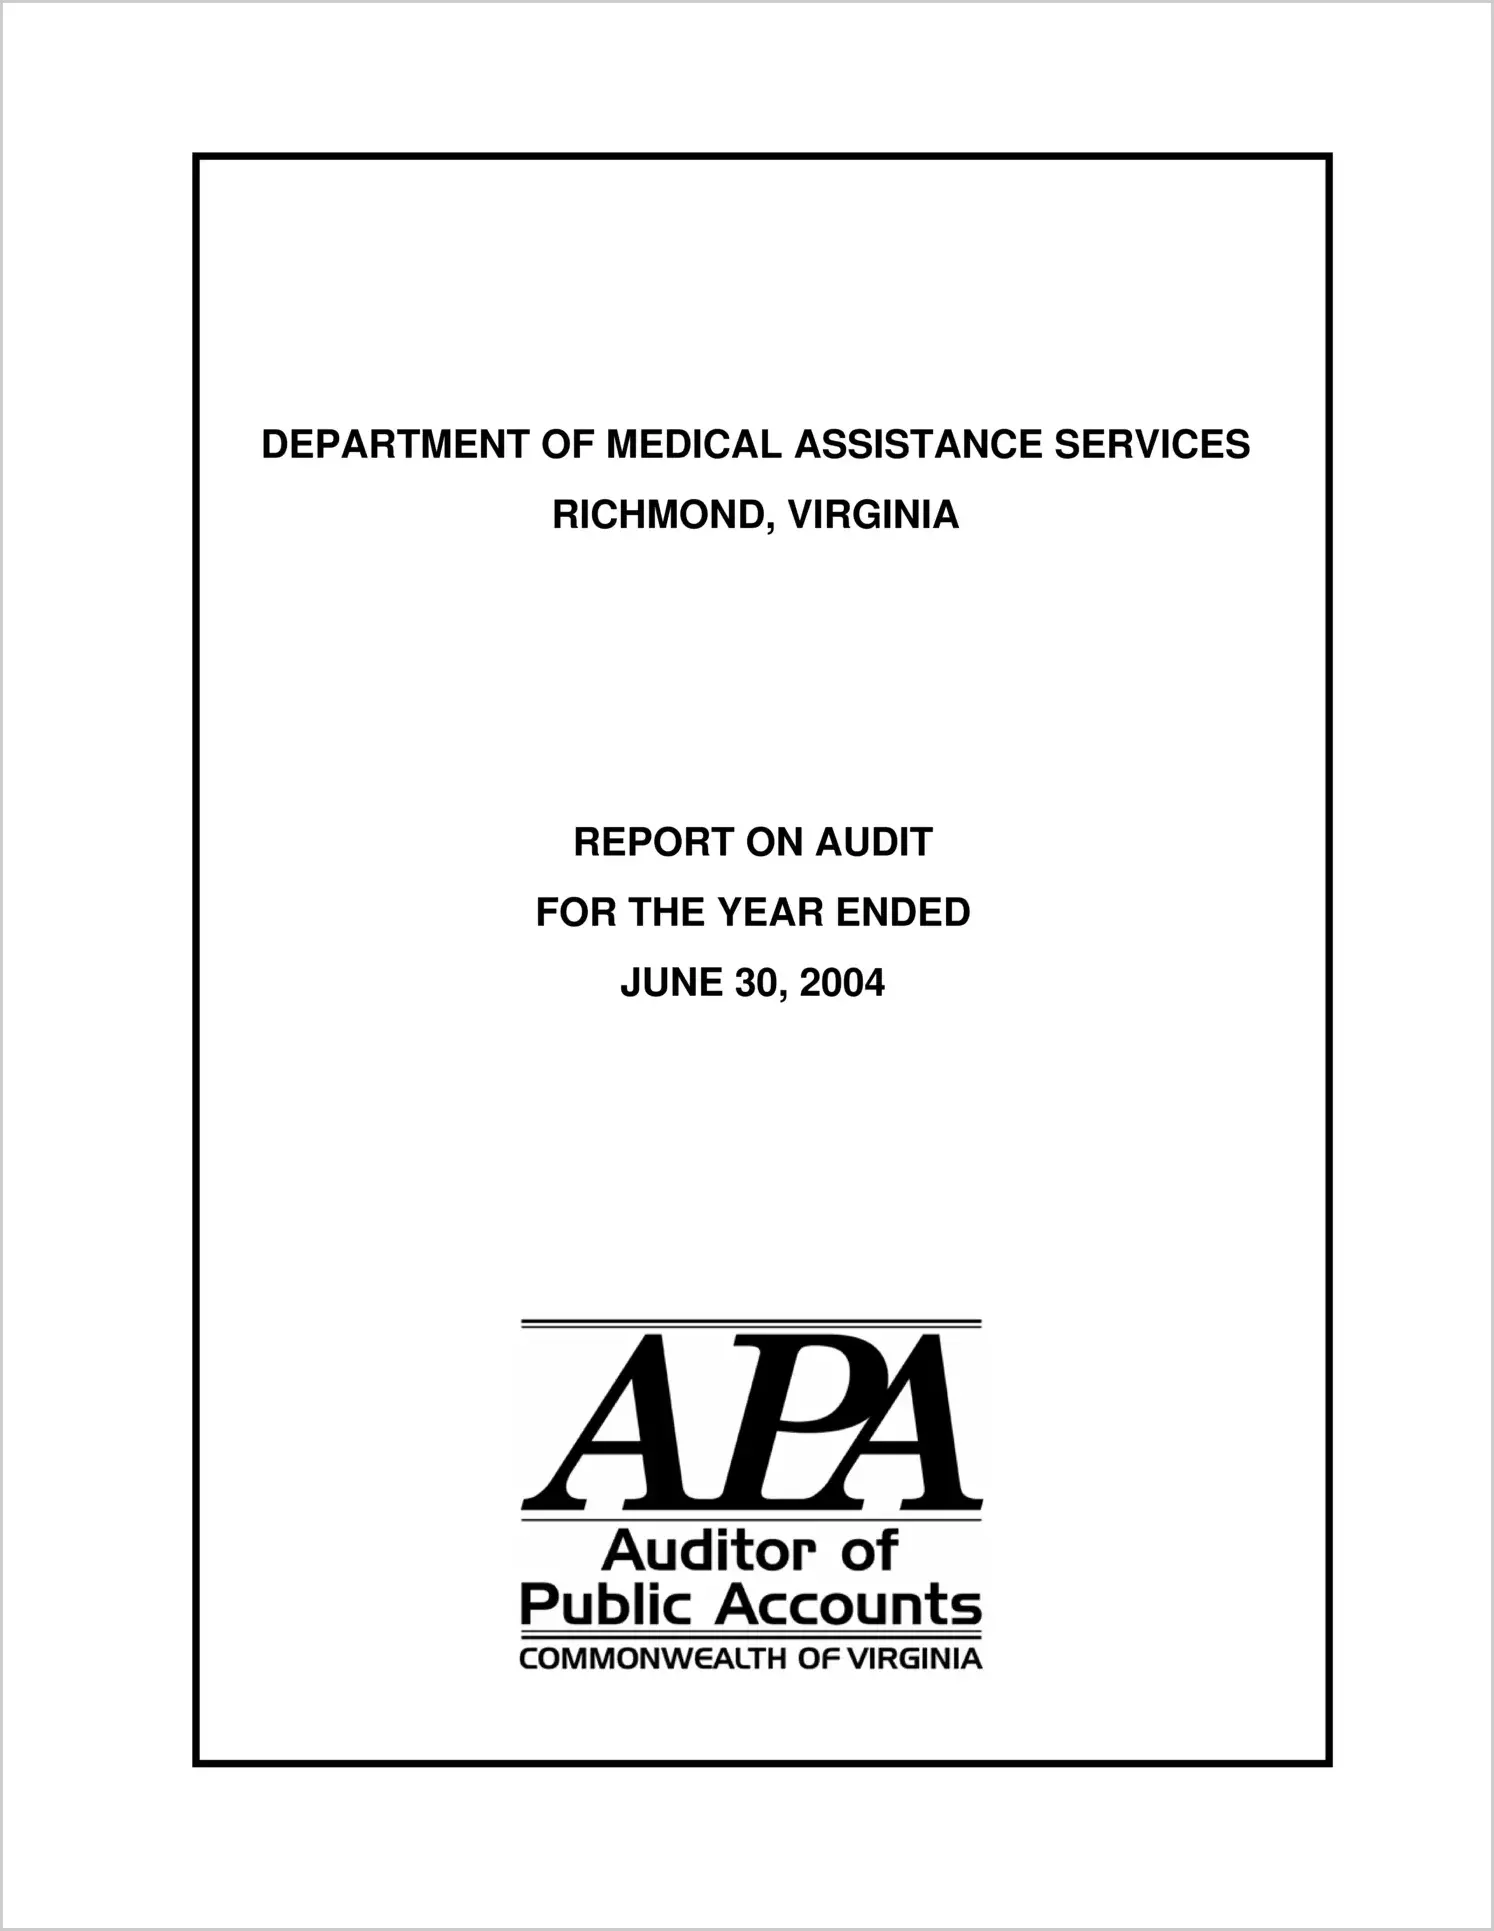 Department of Medical Assistance Services for the year ended June 30, 2004